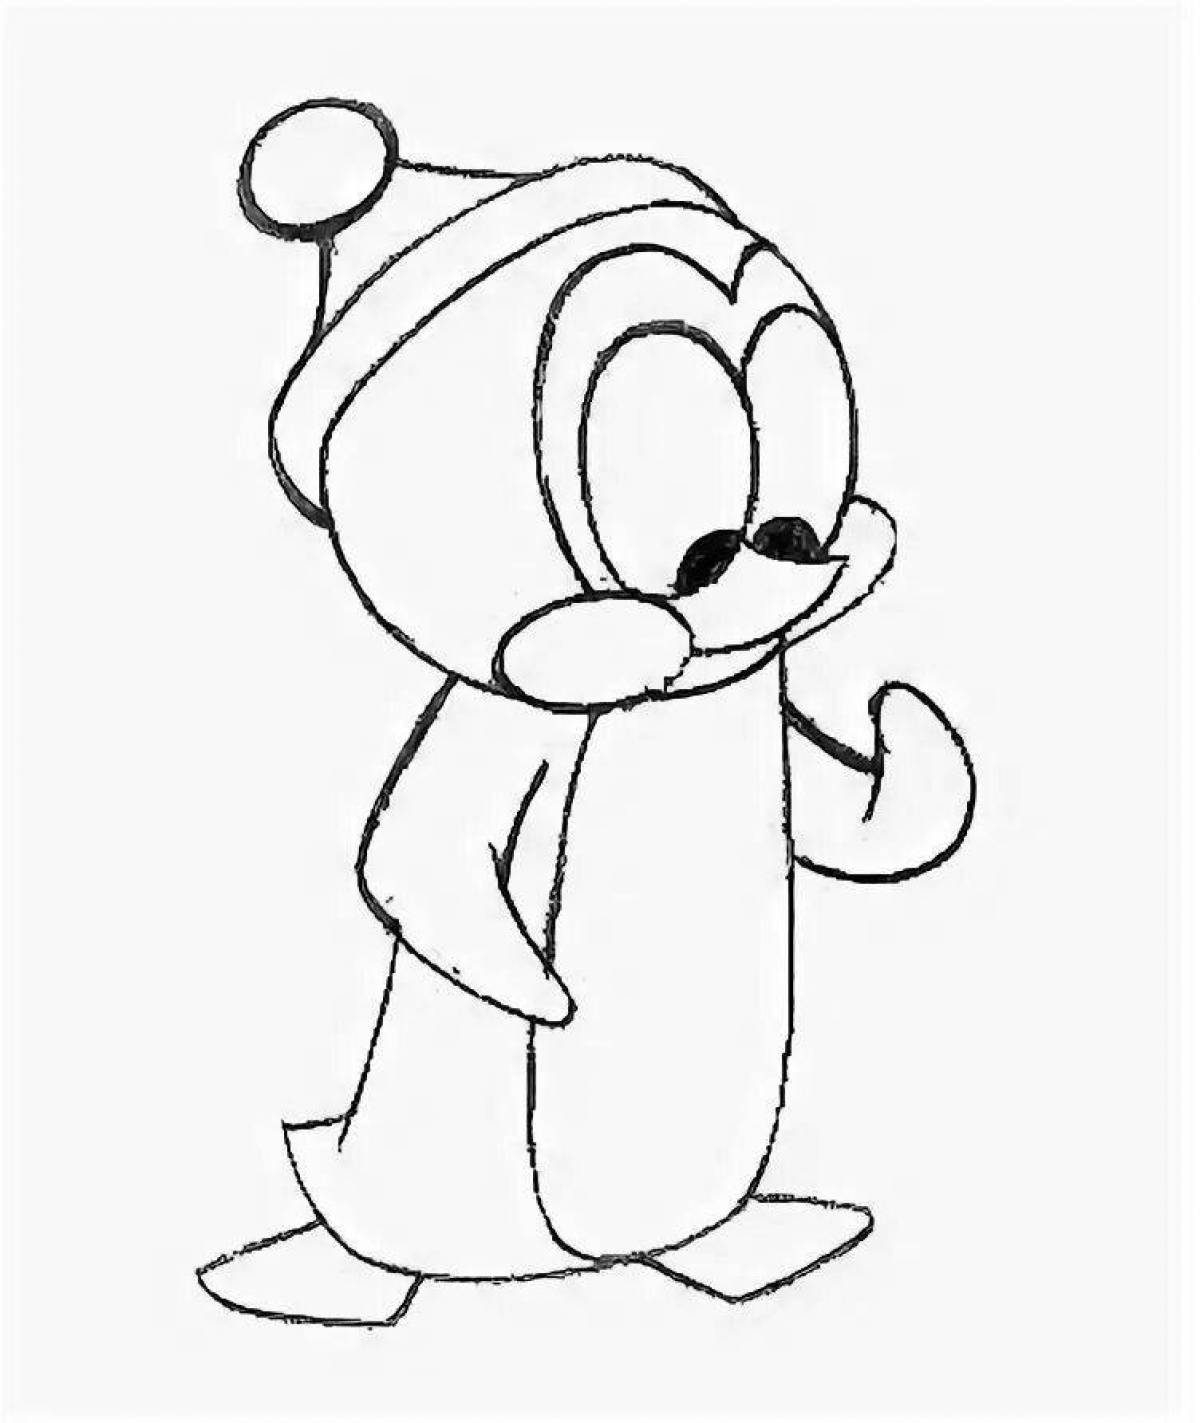 Chilly willy #10